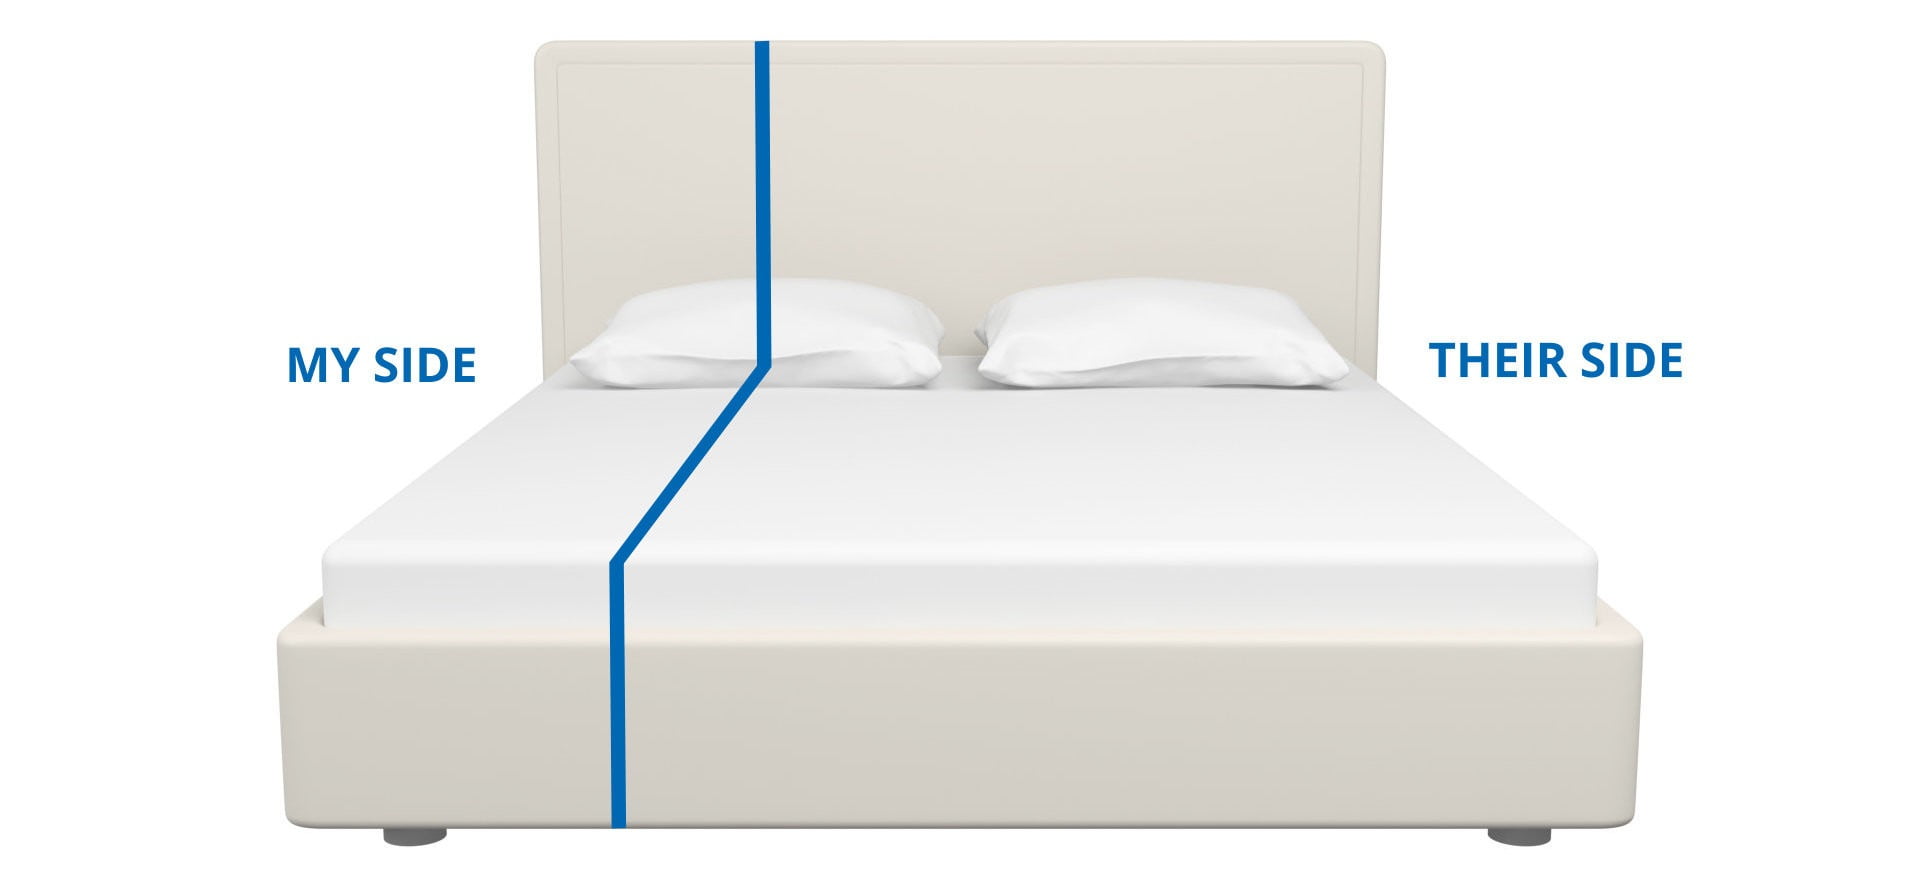 Bed Sizes Uk And Mattress Size, Super King Size Bed Frame Dimensions Uk